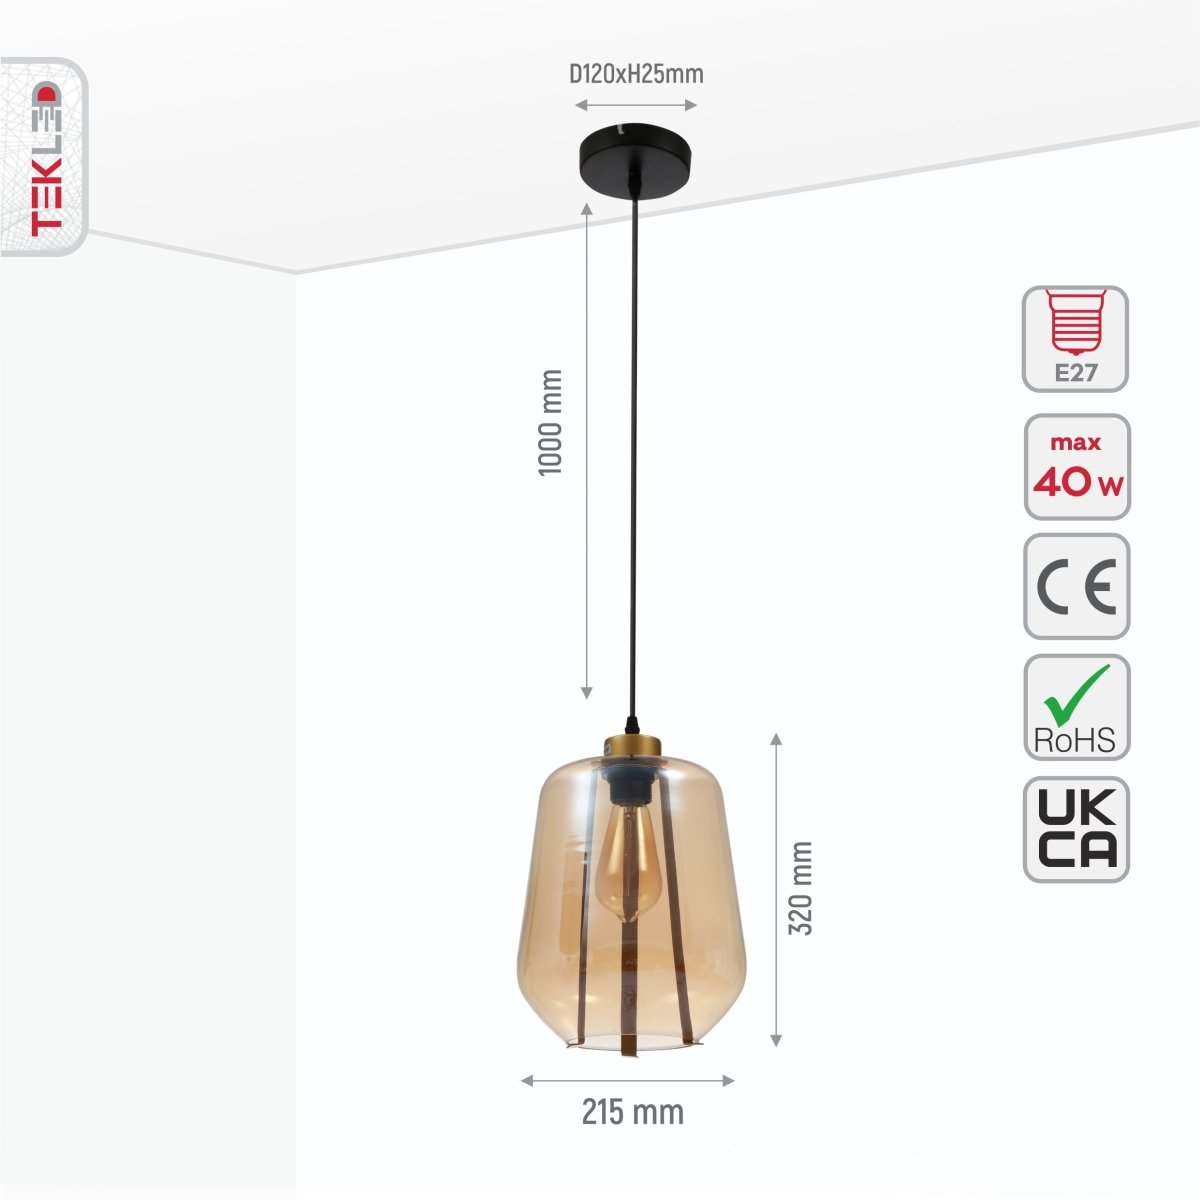 Size and specs of Amber Glass Schoolhouse Pendant Light L with E27 Fitting | TEKLED 159-17350